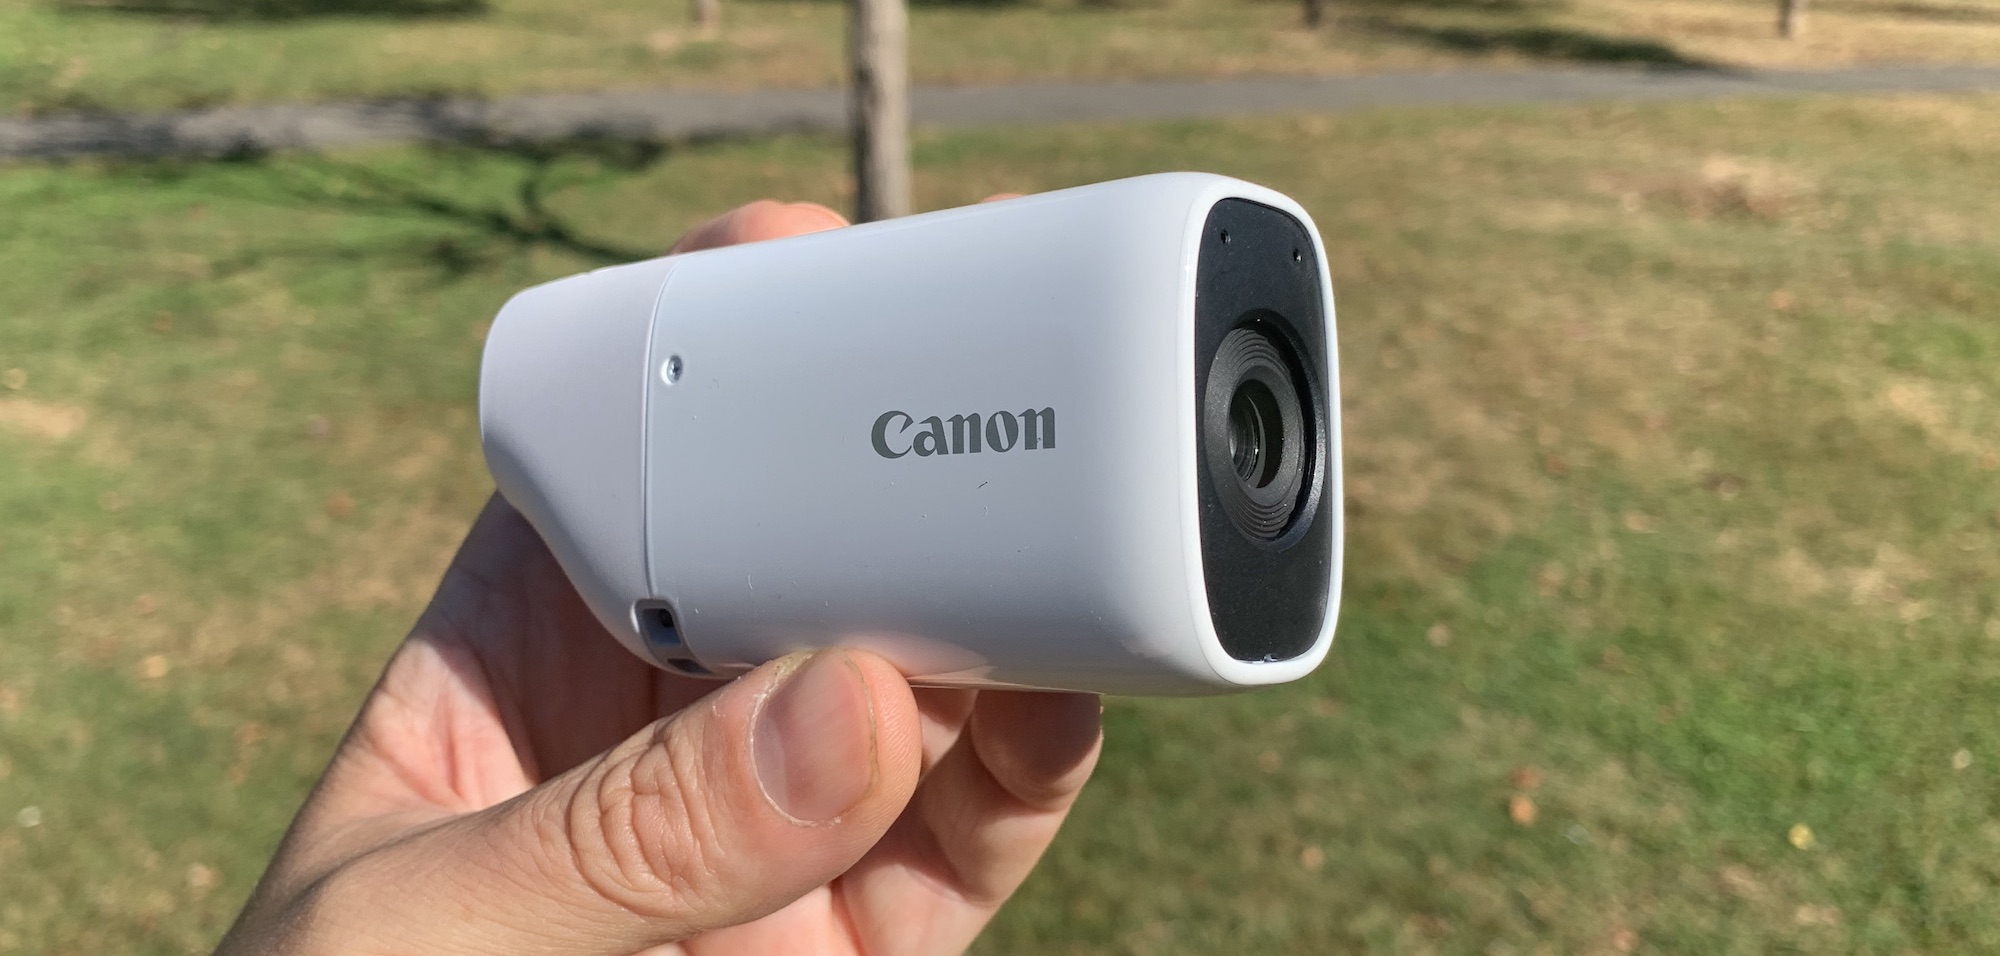 Canon PowerShot Zoom review (hands on) | Tom's Guide